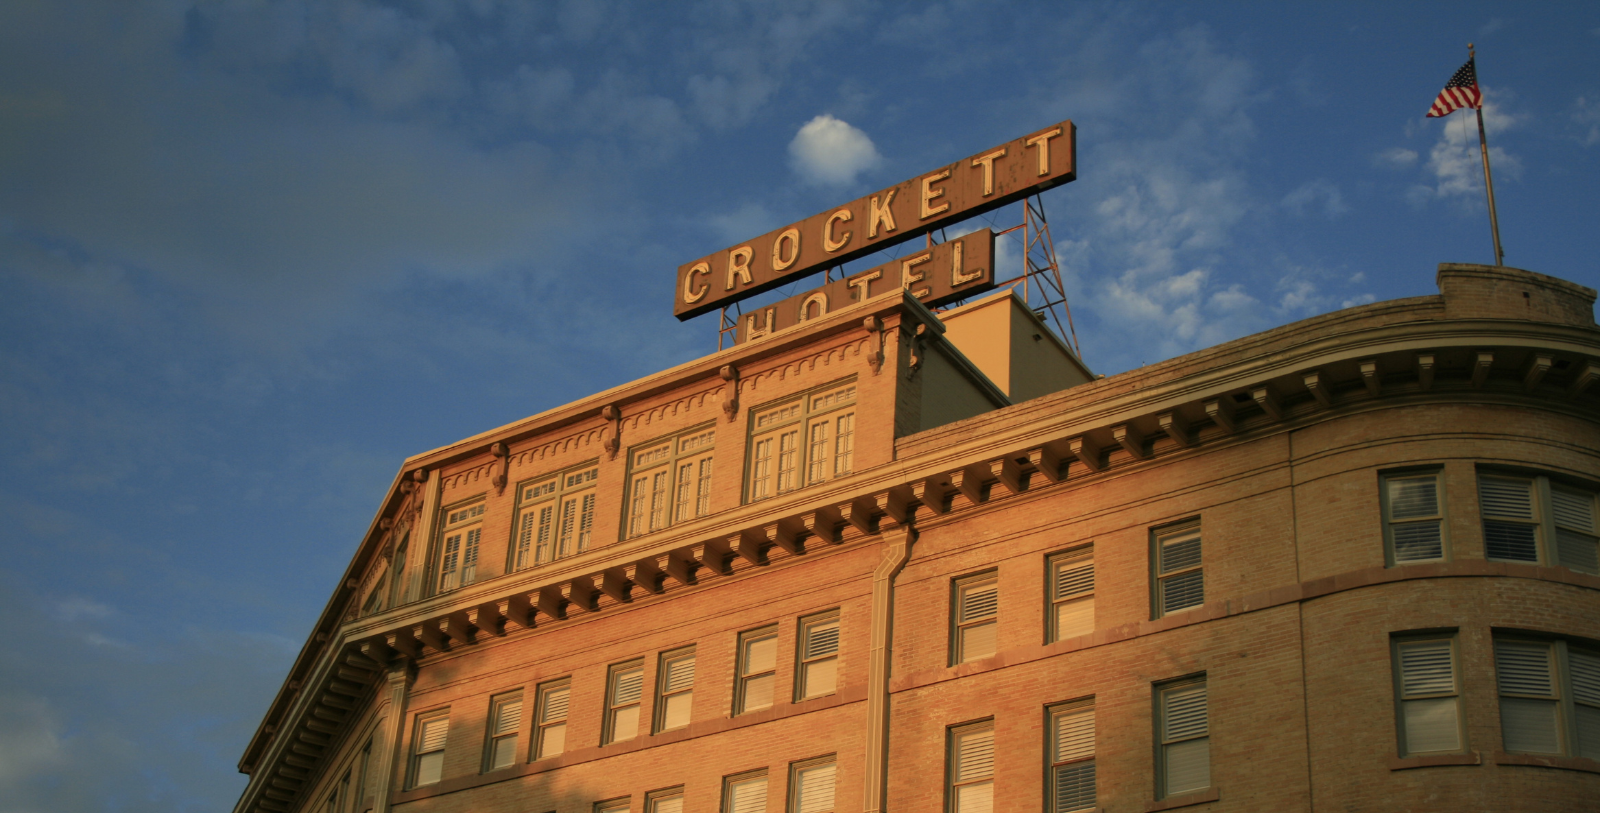 Image of the exterior of The Crockett Hotel, a member of Historic Hotels of America since 2010, located in San Antonio, Texas